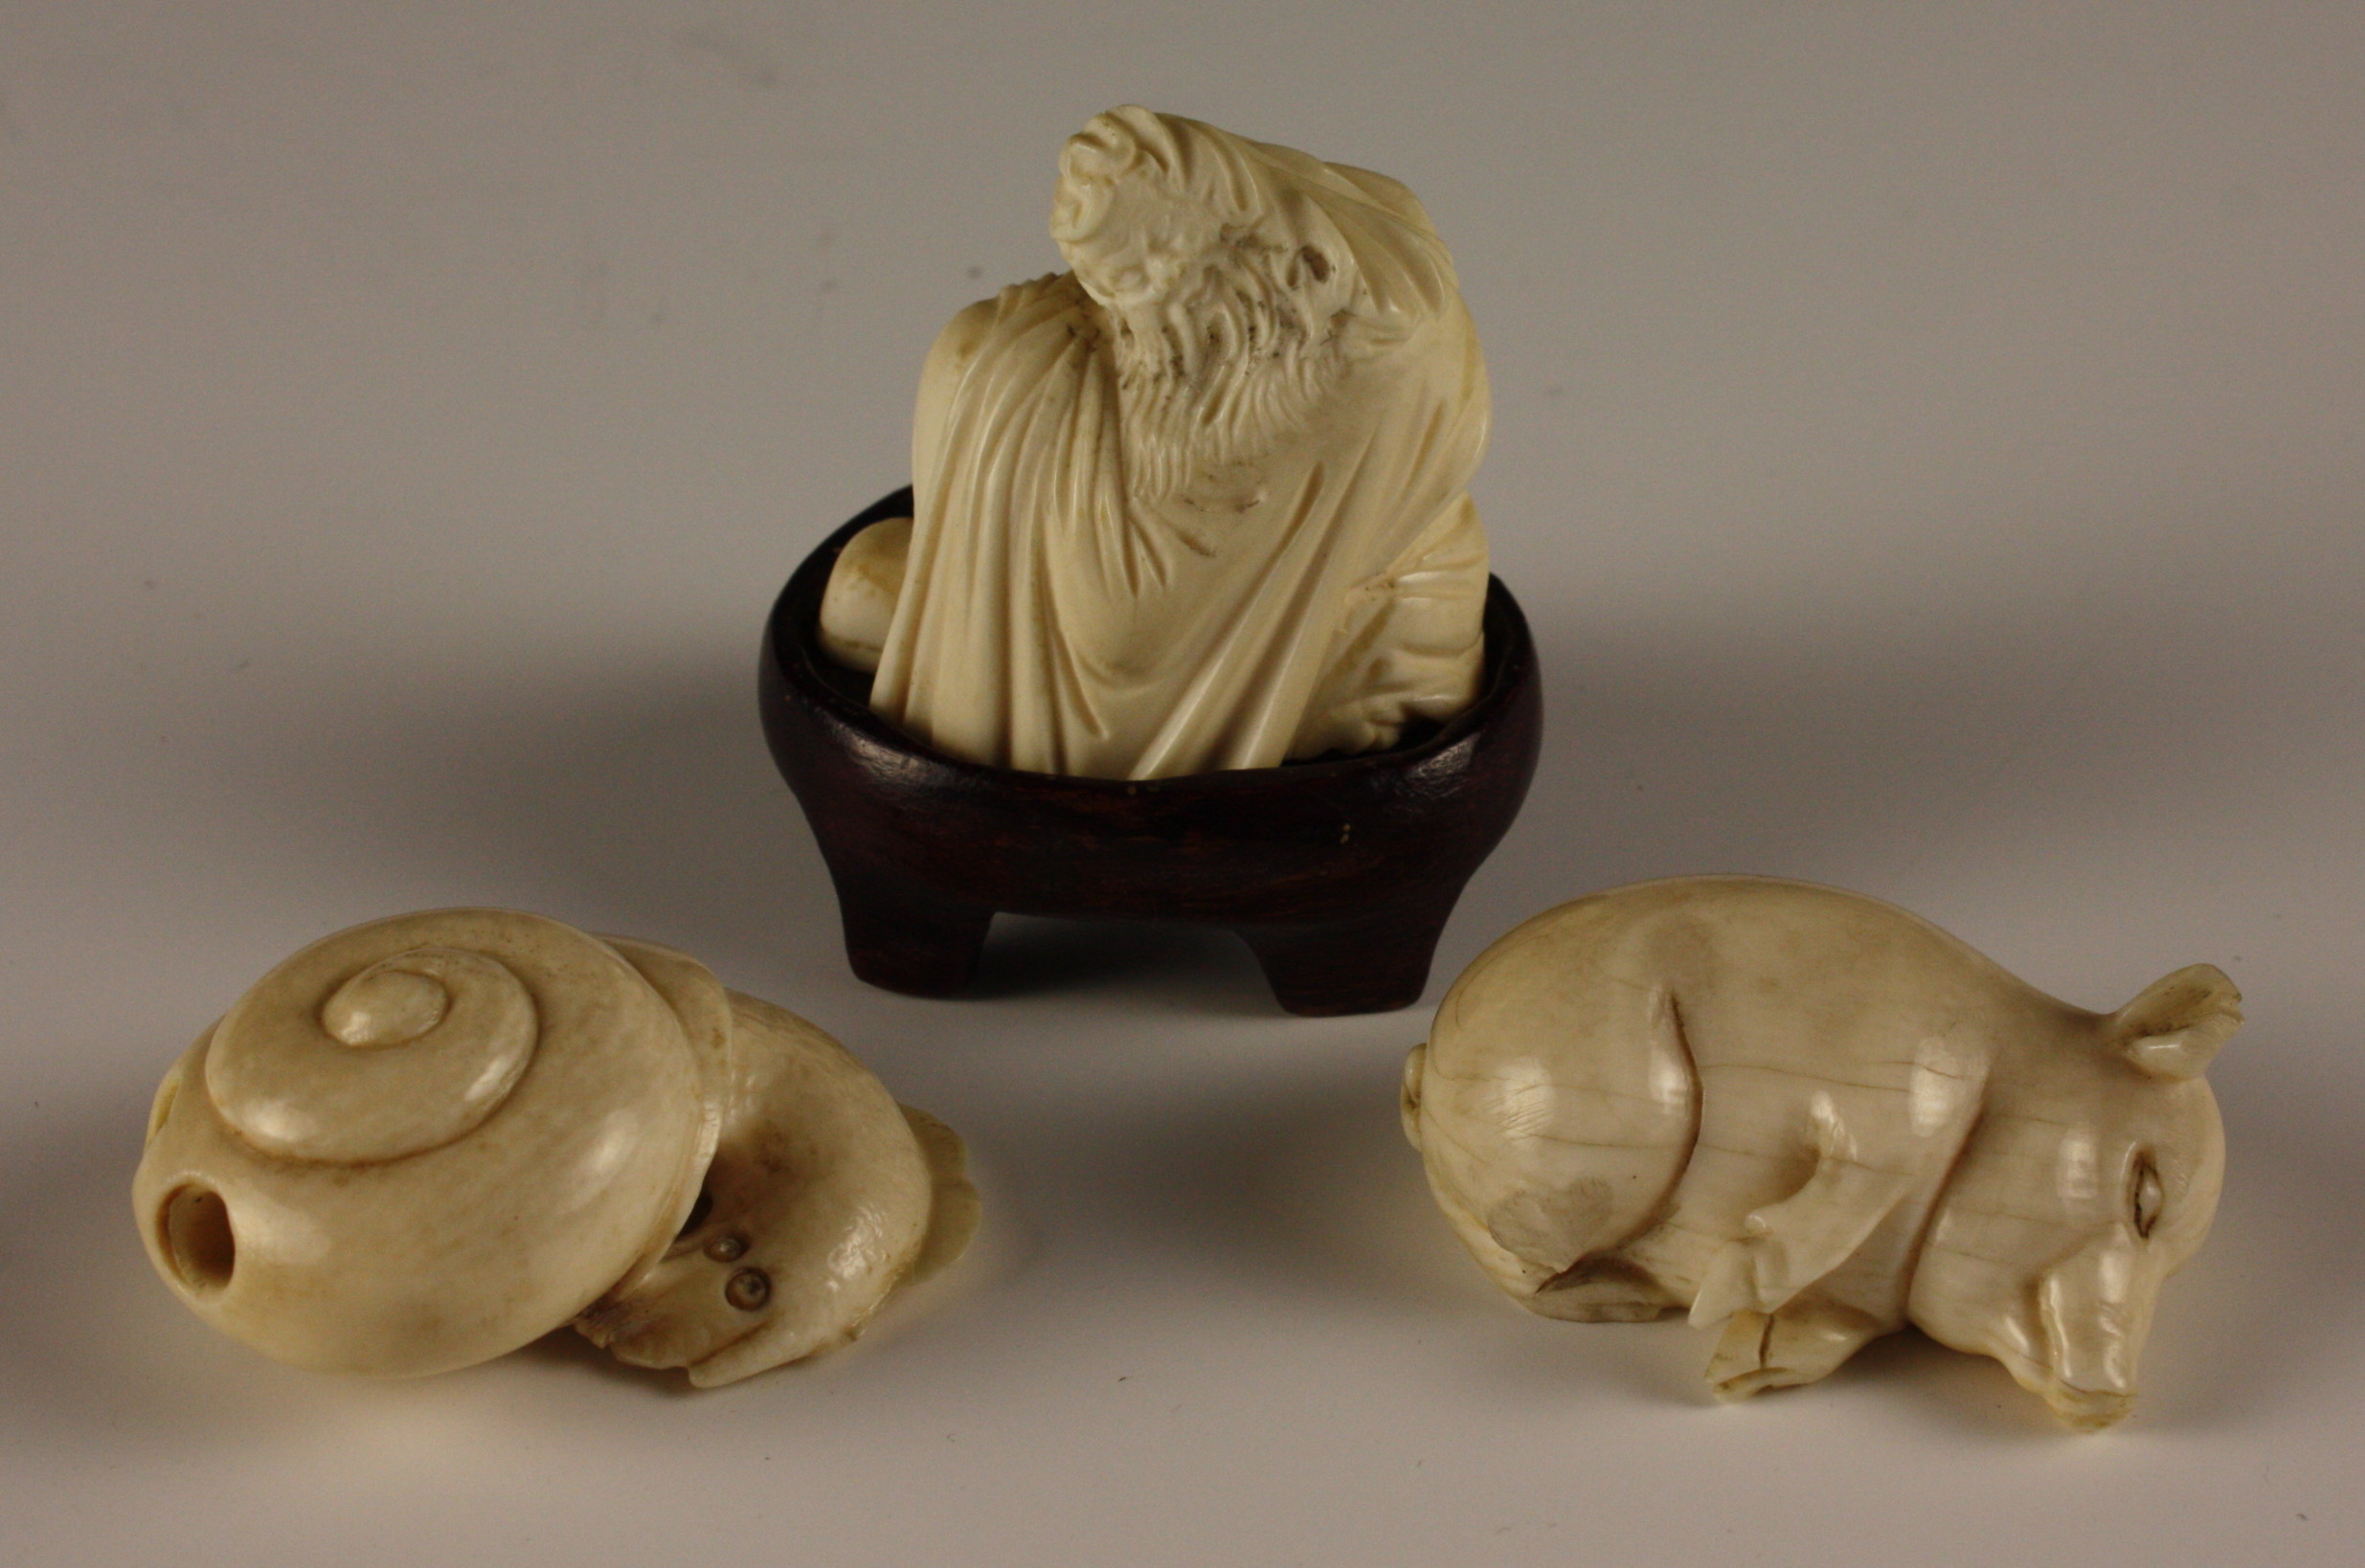 Three Small Ivory Carvings: A signed Netsuke carved in the form of a snail, a small sleeping